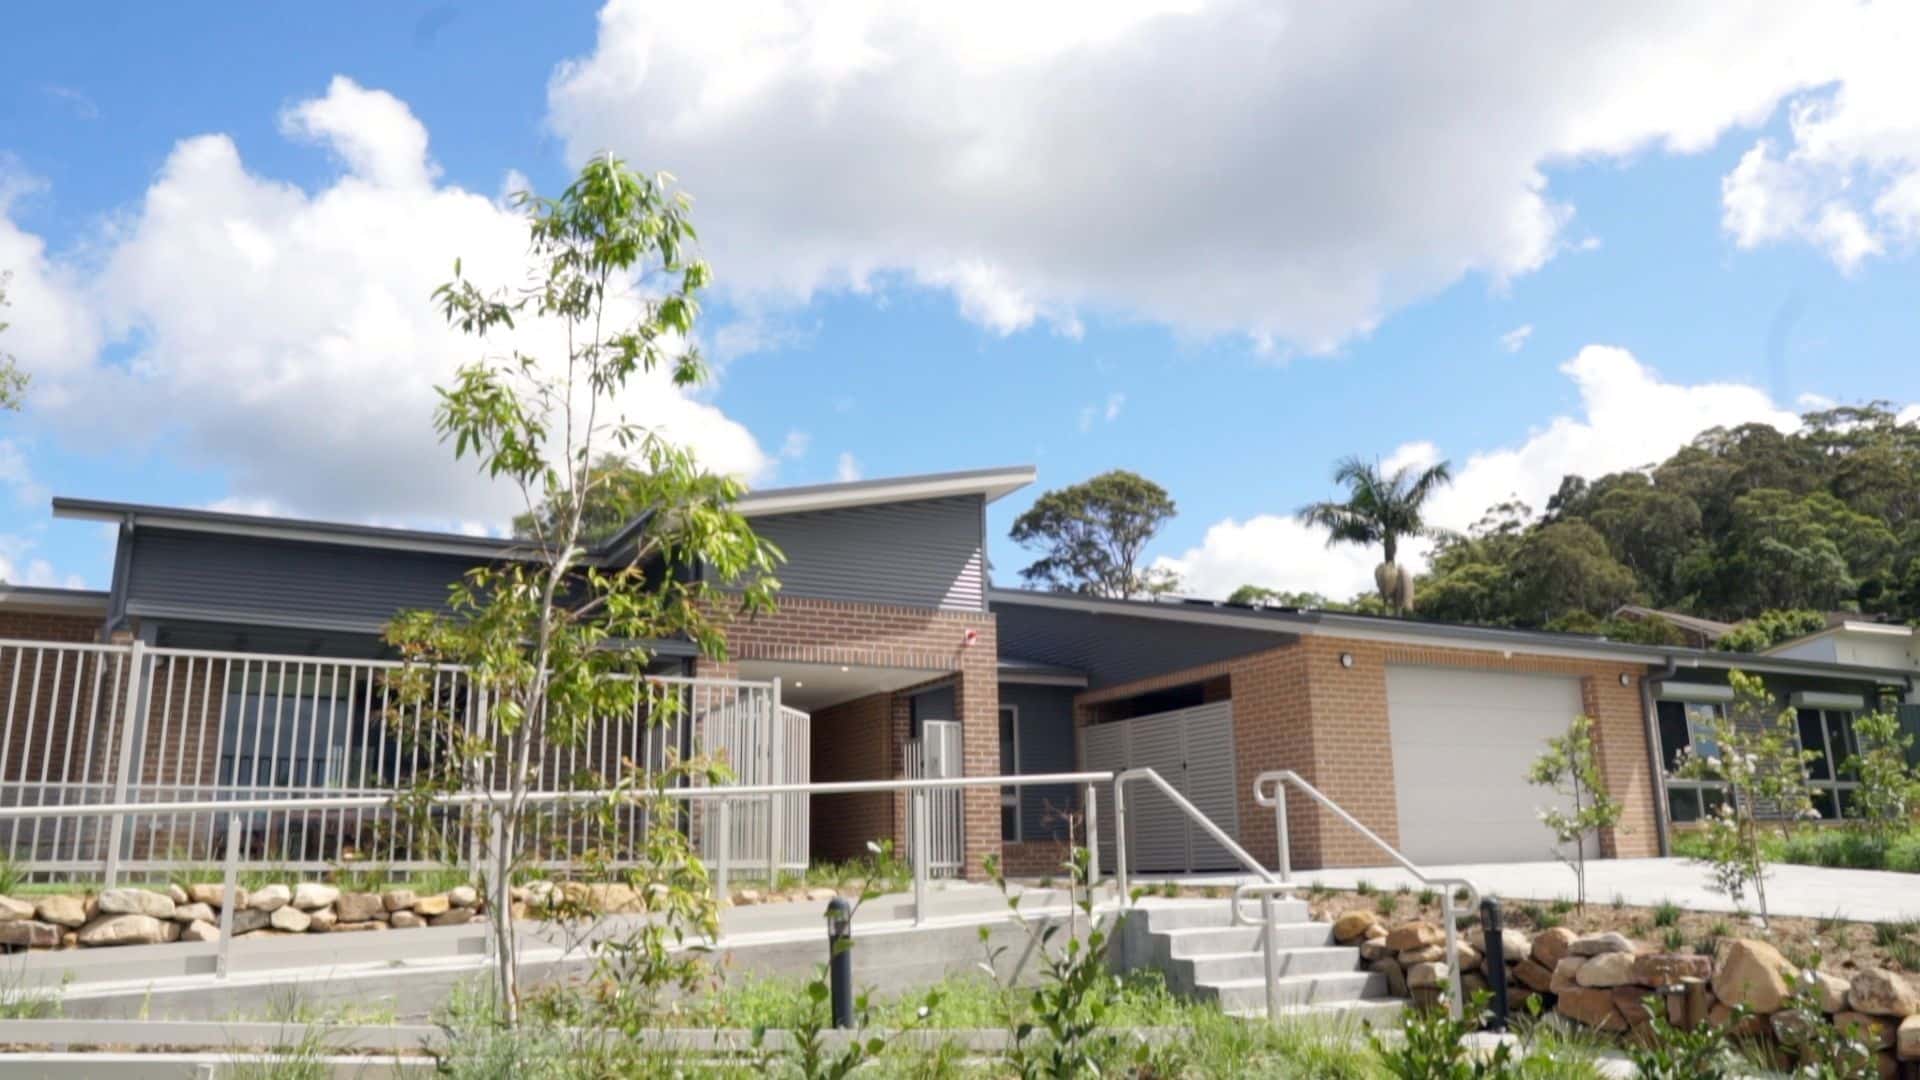 Front of the Wyong 1 property, a set of stairs with a ramp beside it leading up to a brick house with secure garage.